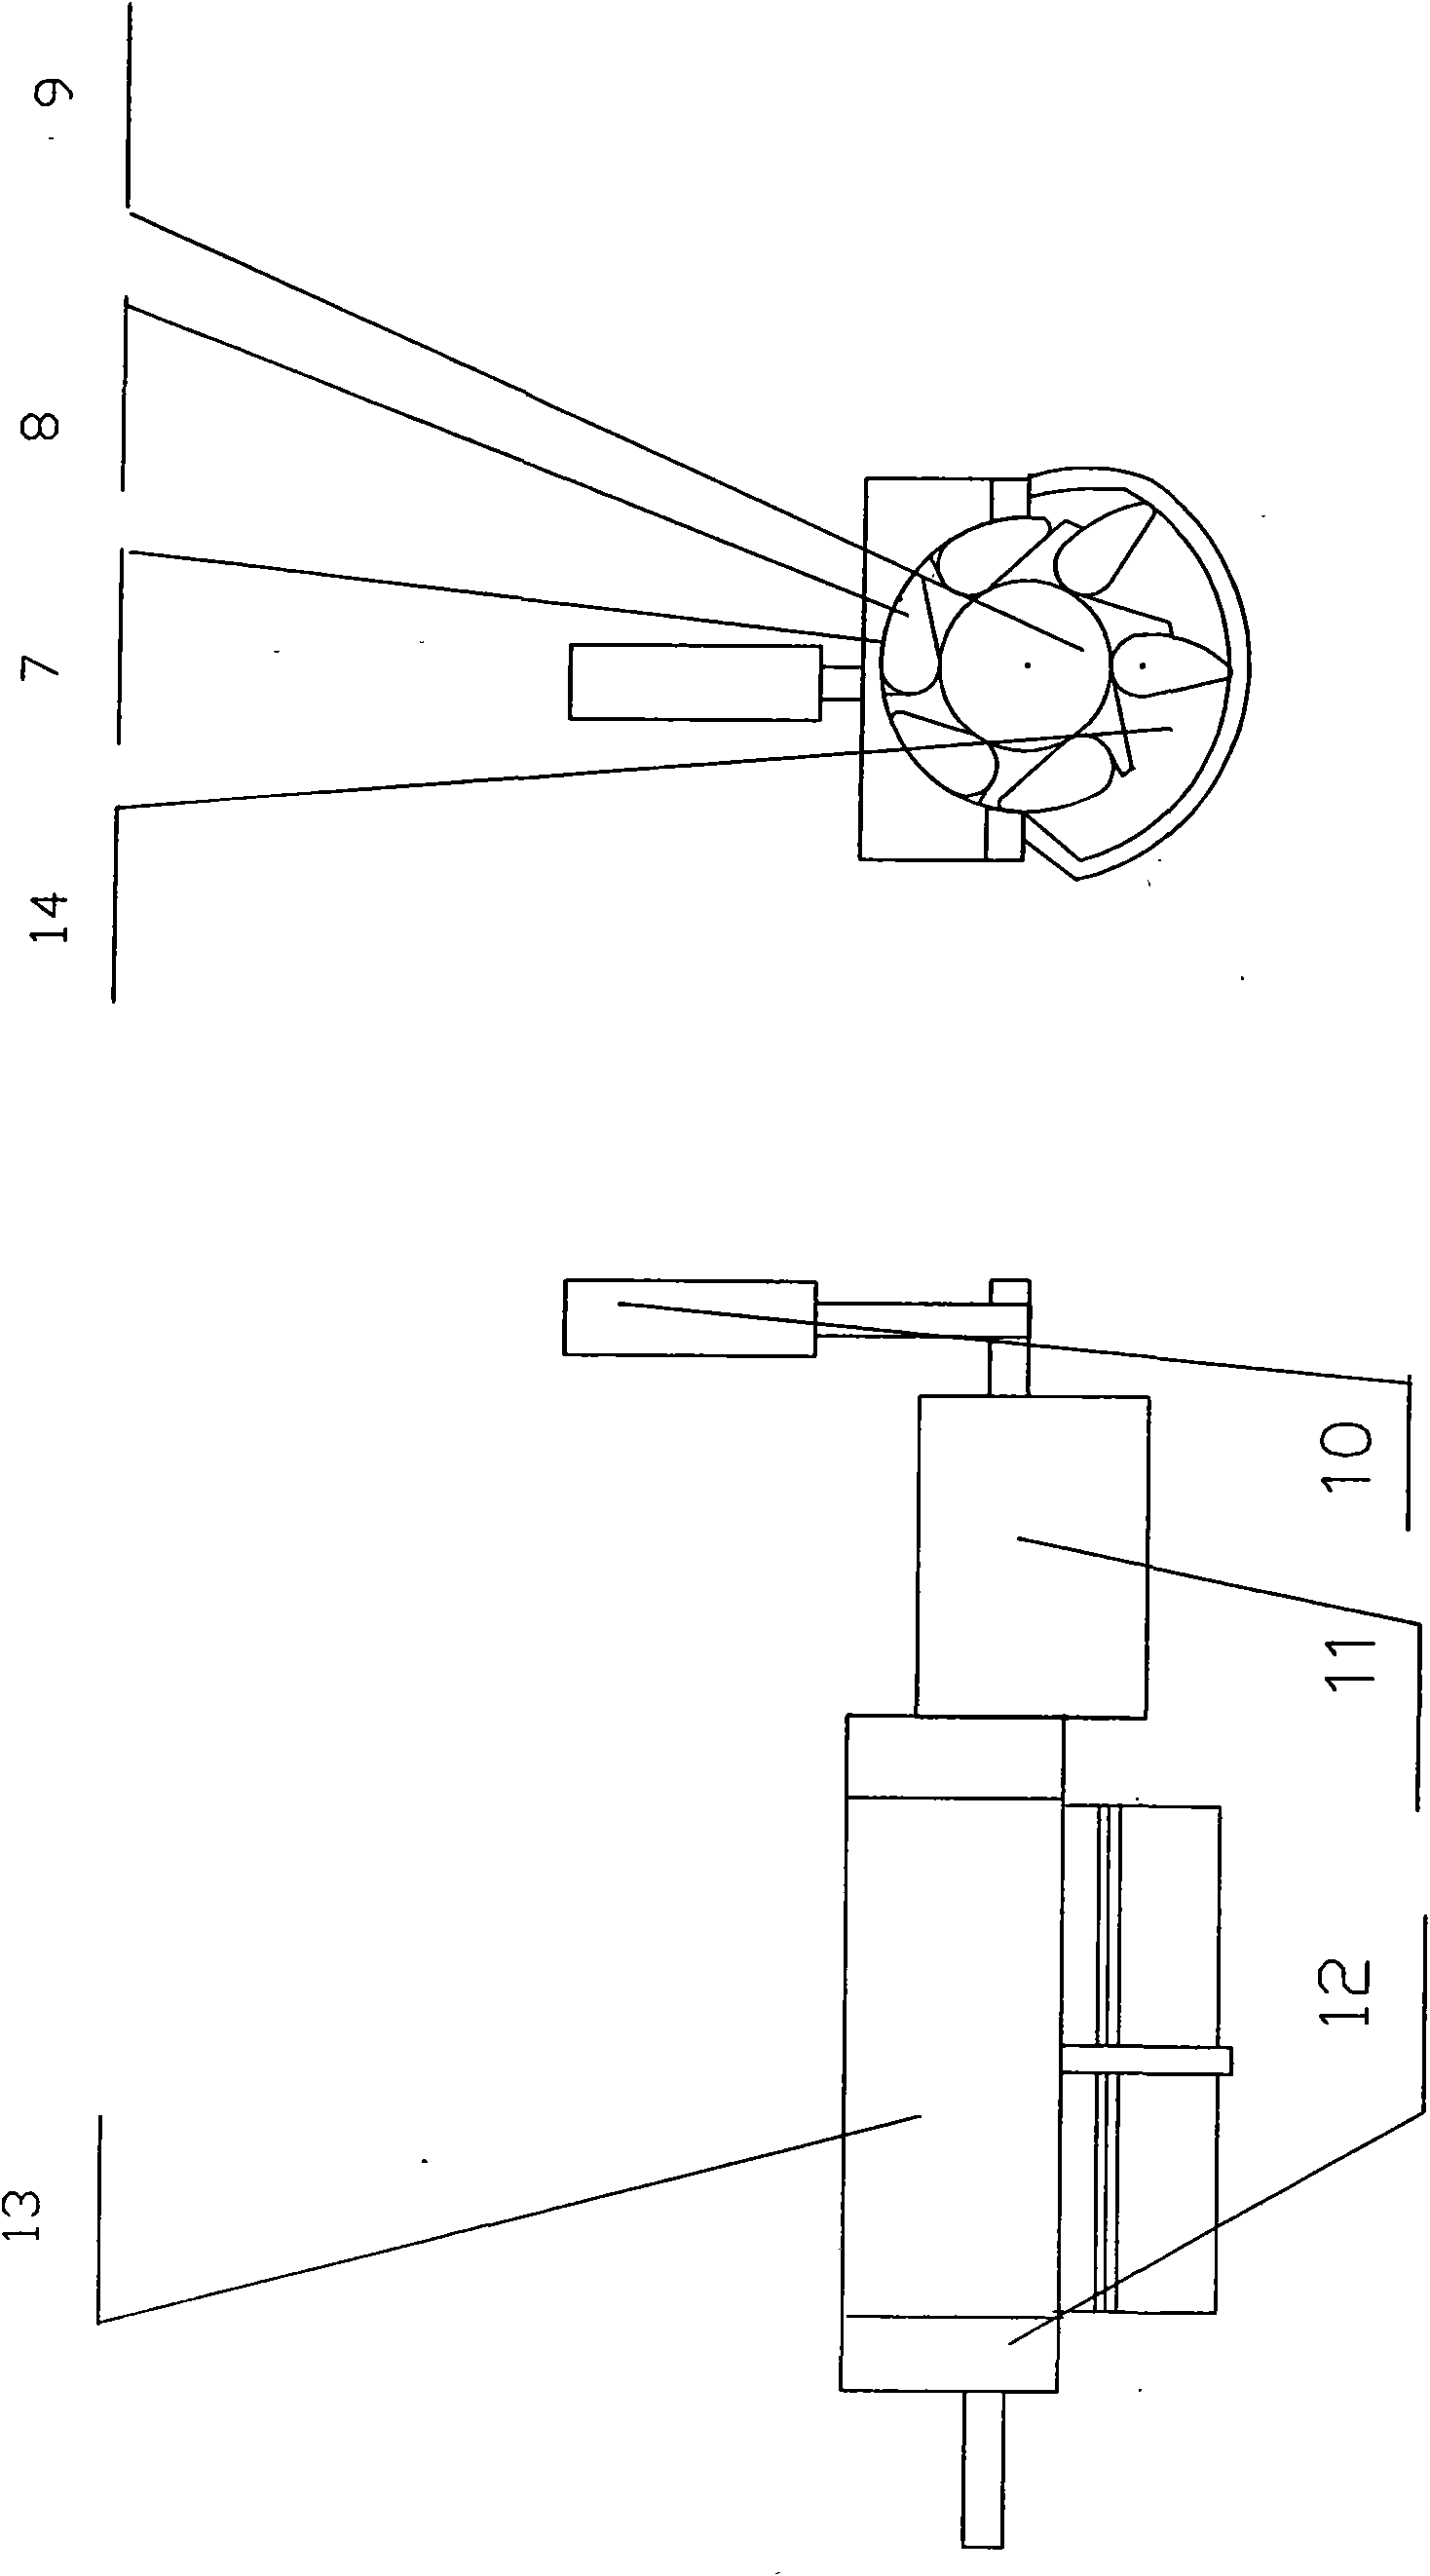 Hydraulic action device